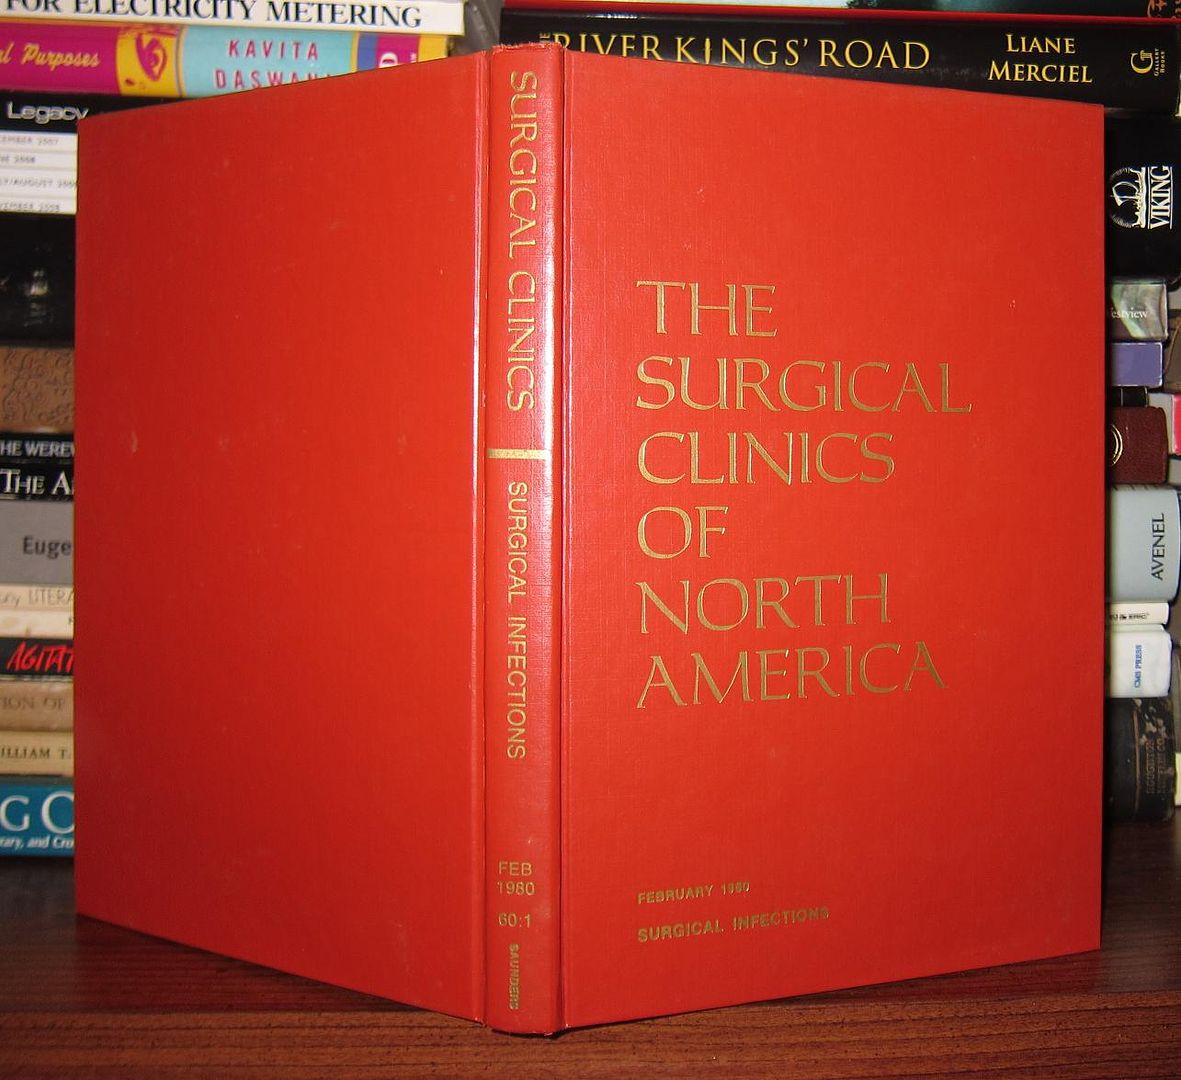 ALEXANDER, J. WESLEY - The Surgical Clinics of North America Volume 60, Number 1, February 1980: Surgical Infections